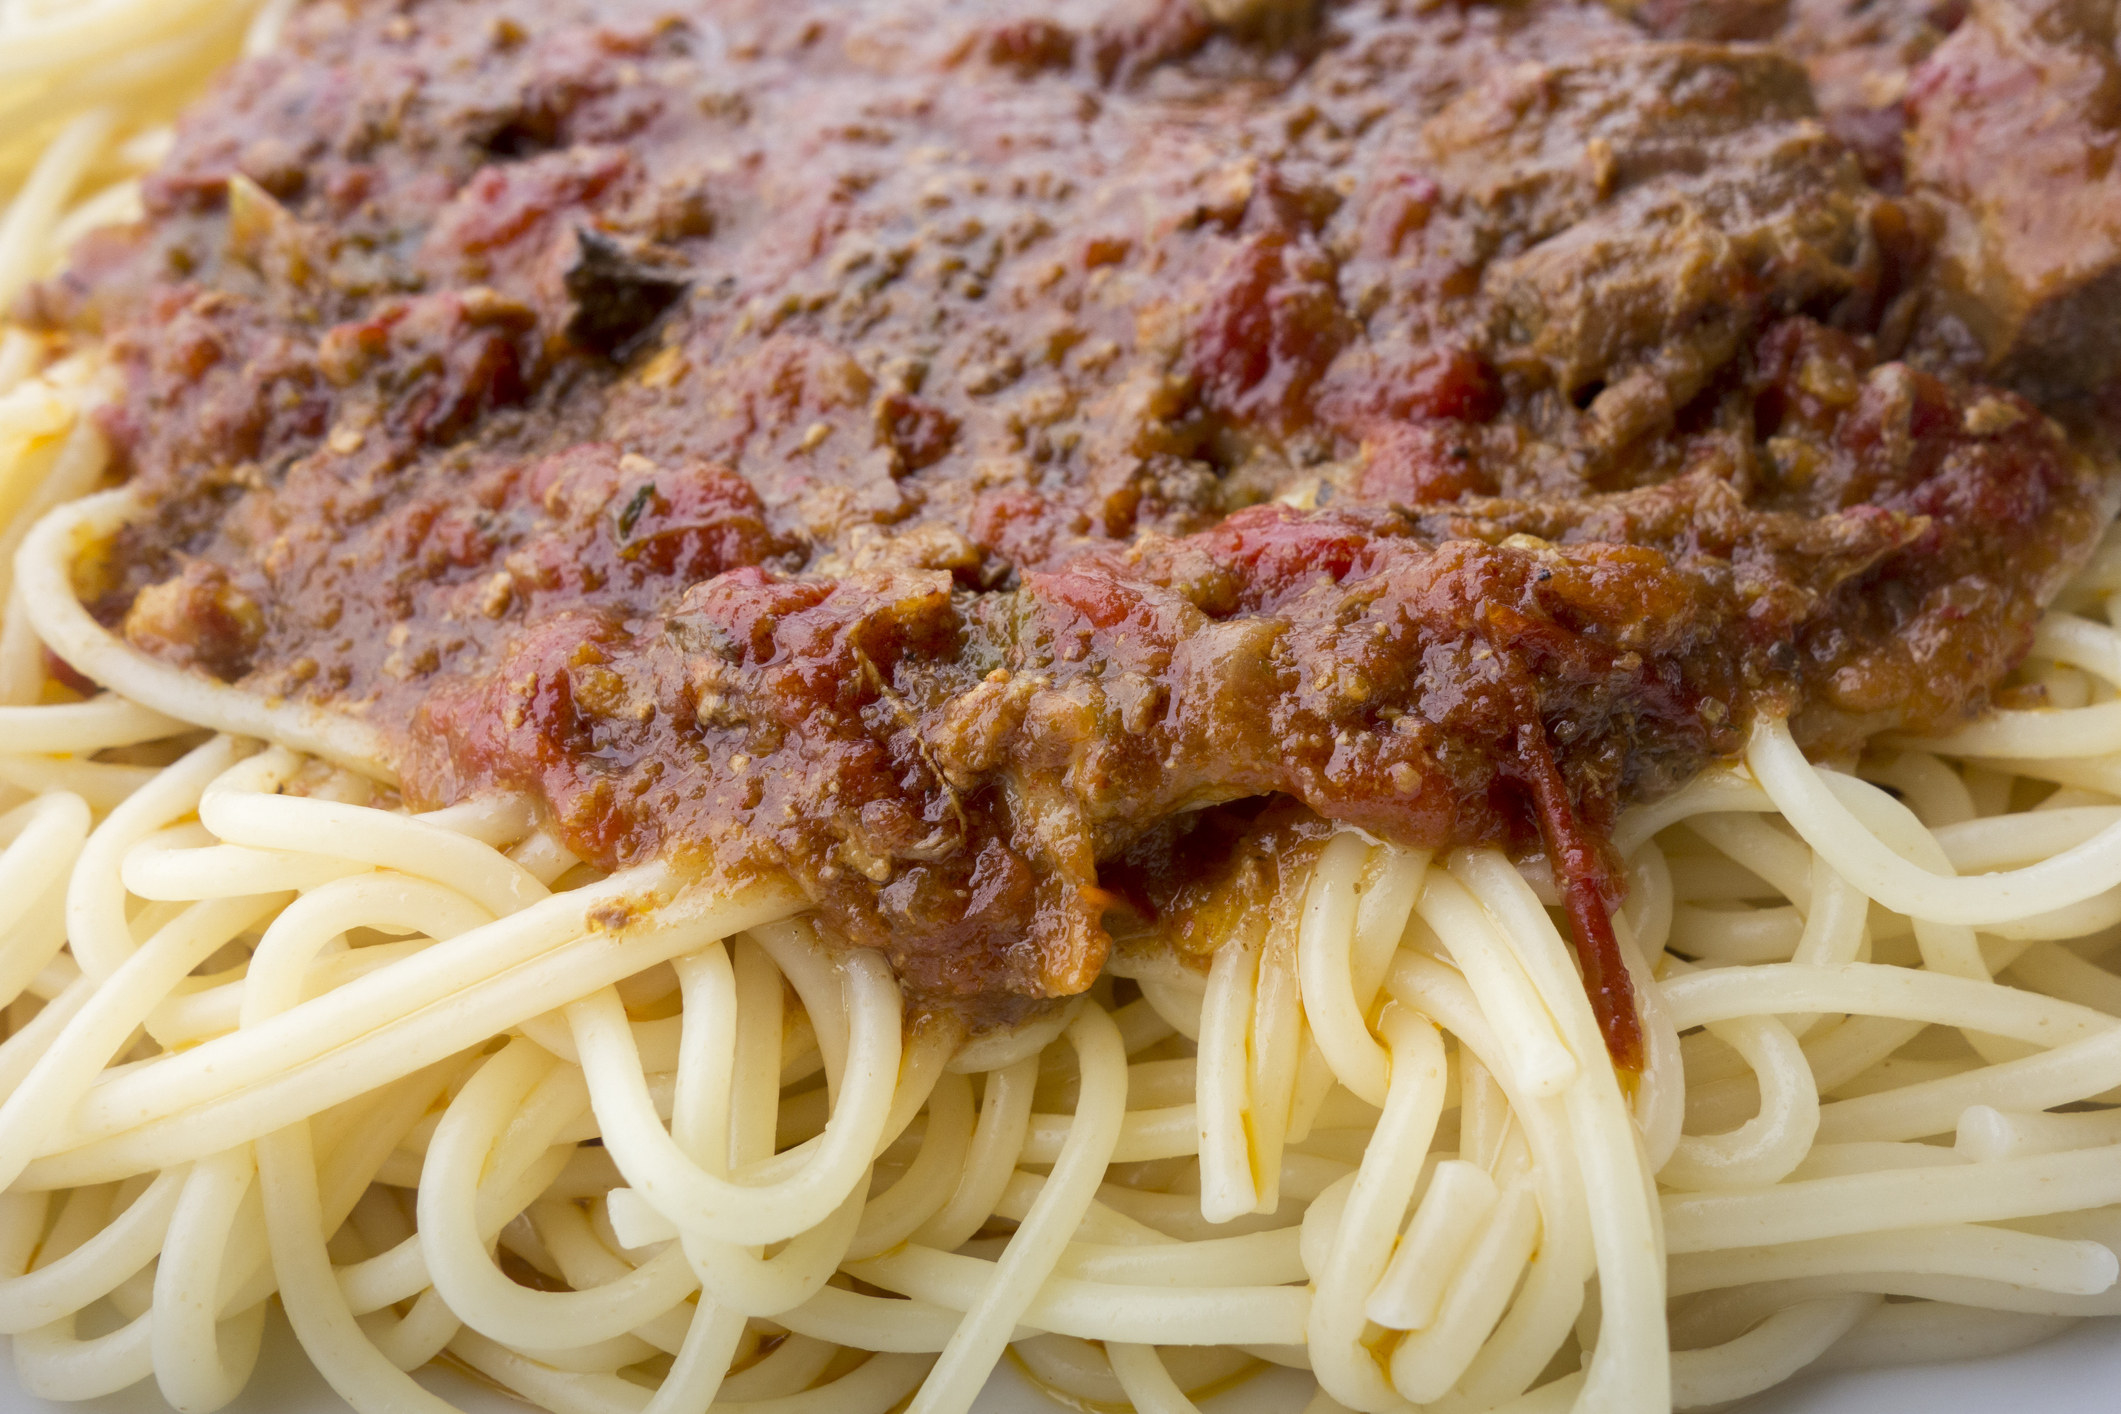 Spaghetti with meat sauce.